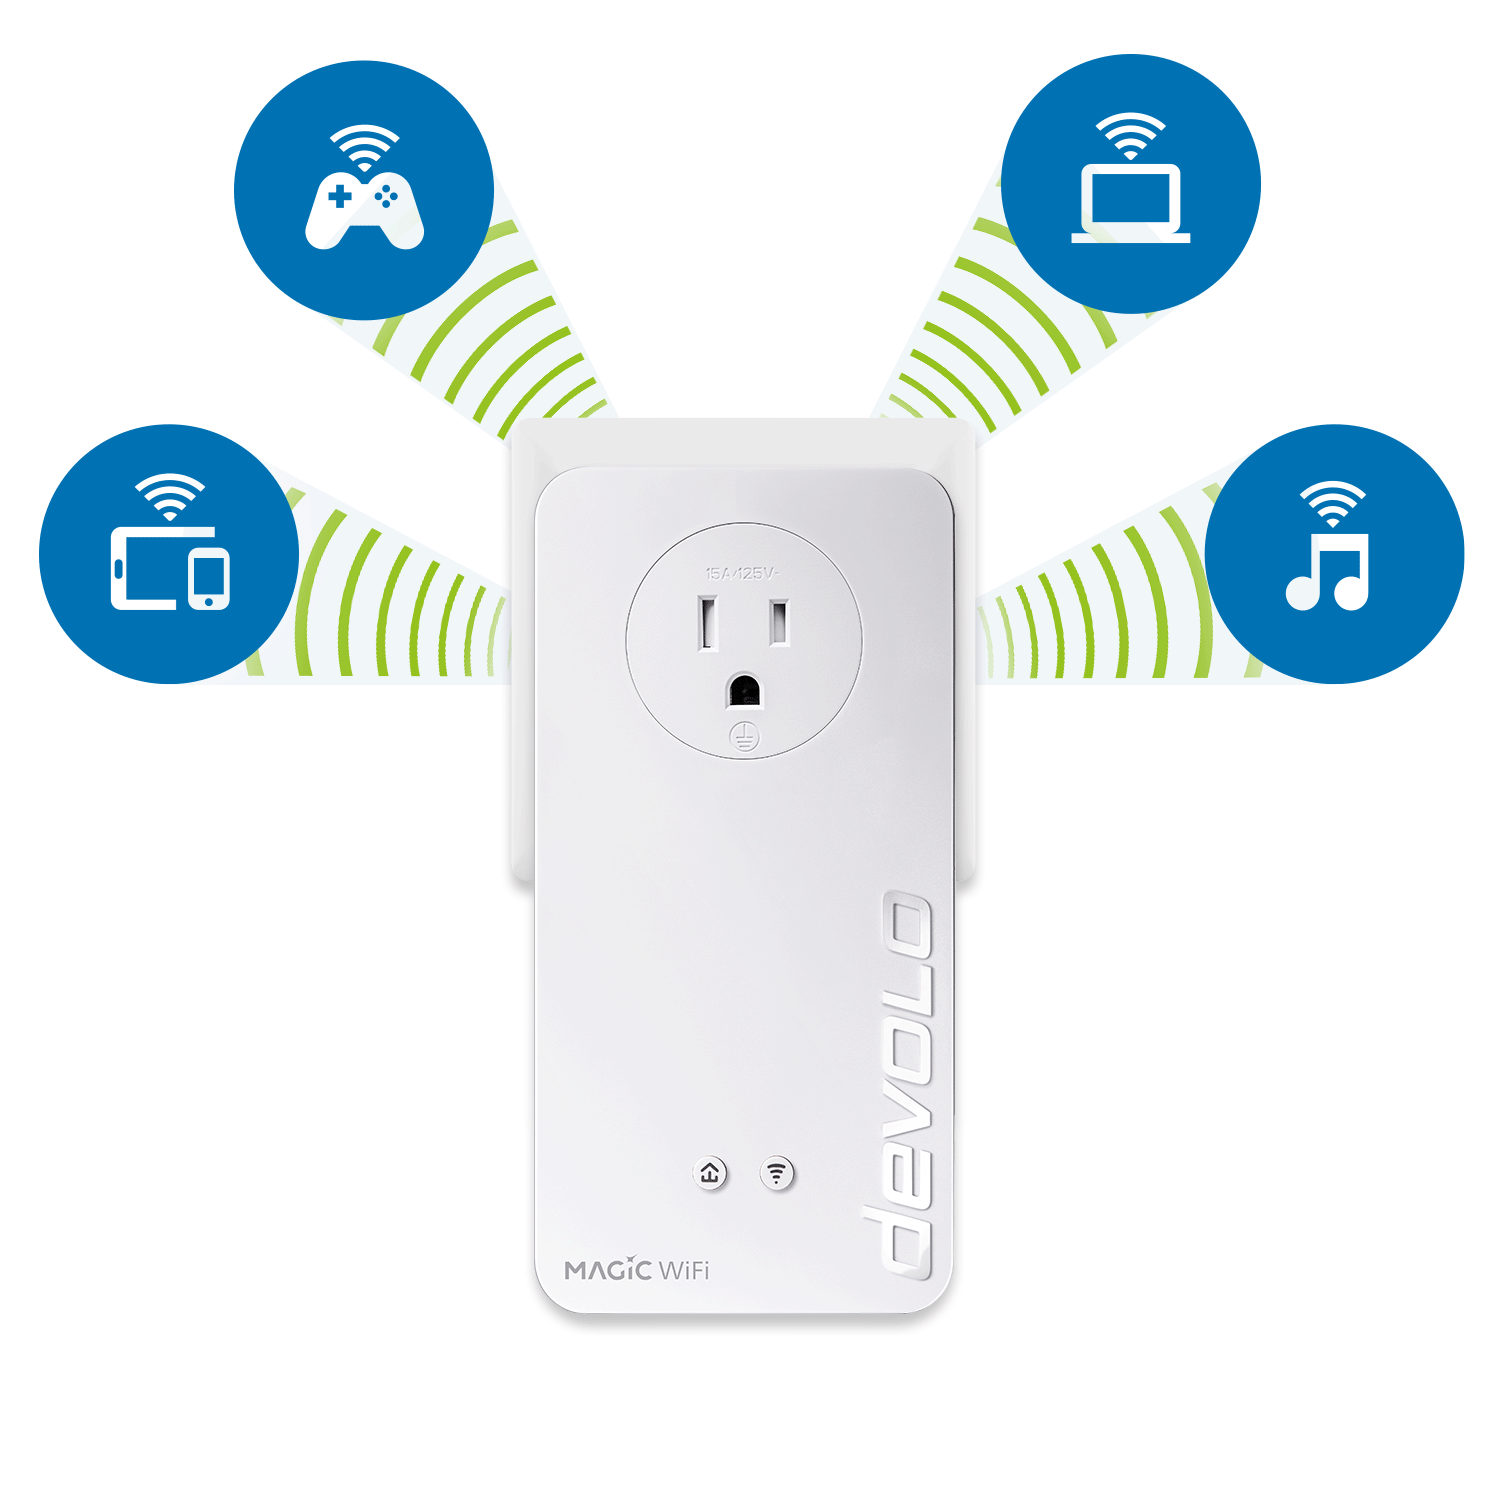 A Magic 2 Wi-Fi next adaptor connecting to many devices.